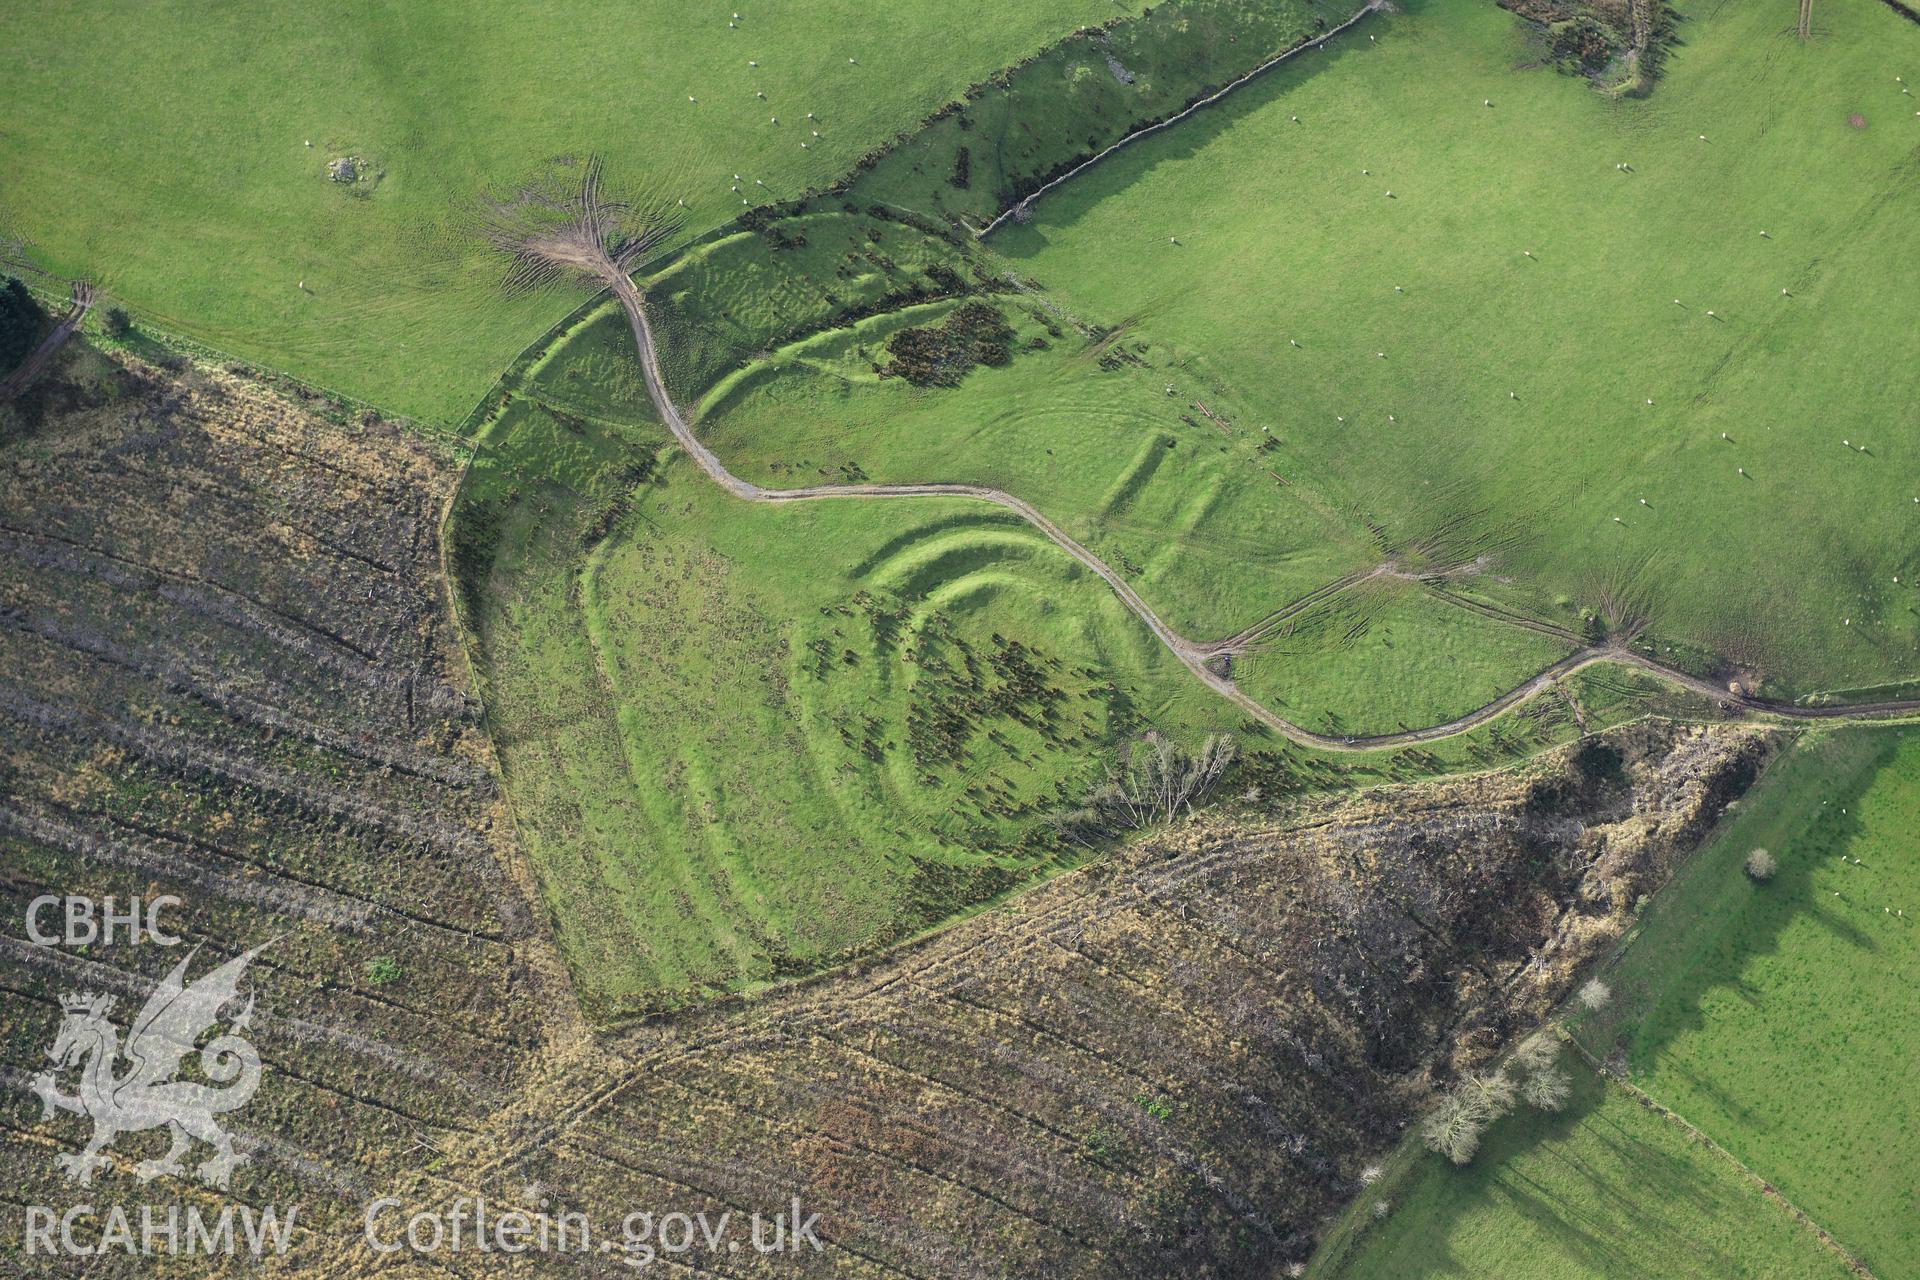 RCAHMW colour oblique photograph of Gaer Fawr, with clearance of forestry block. Taken by Toby Driver on 28/11/2012.